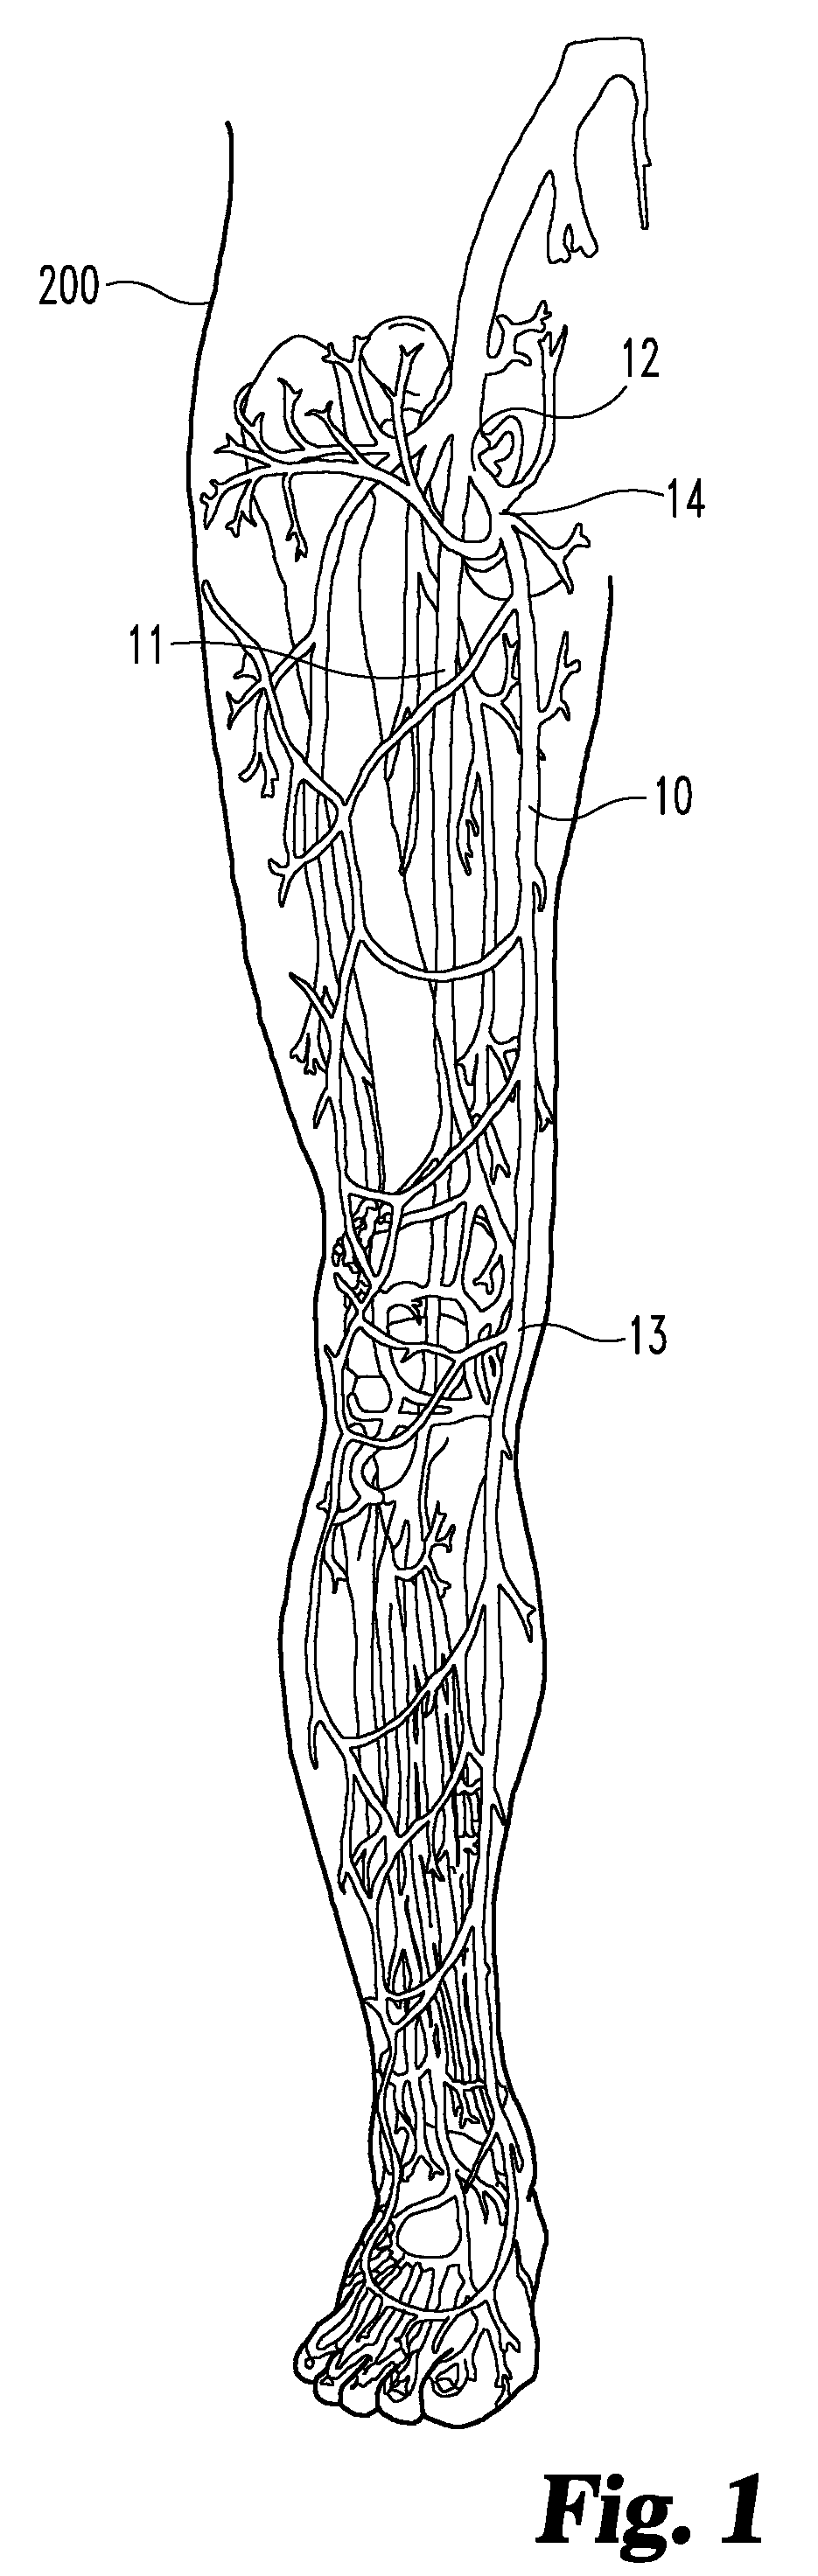 Enhanced remodelable materials for occluding bodily vessels